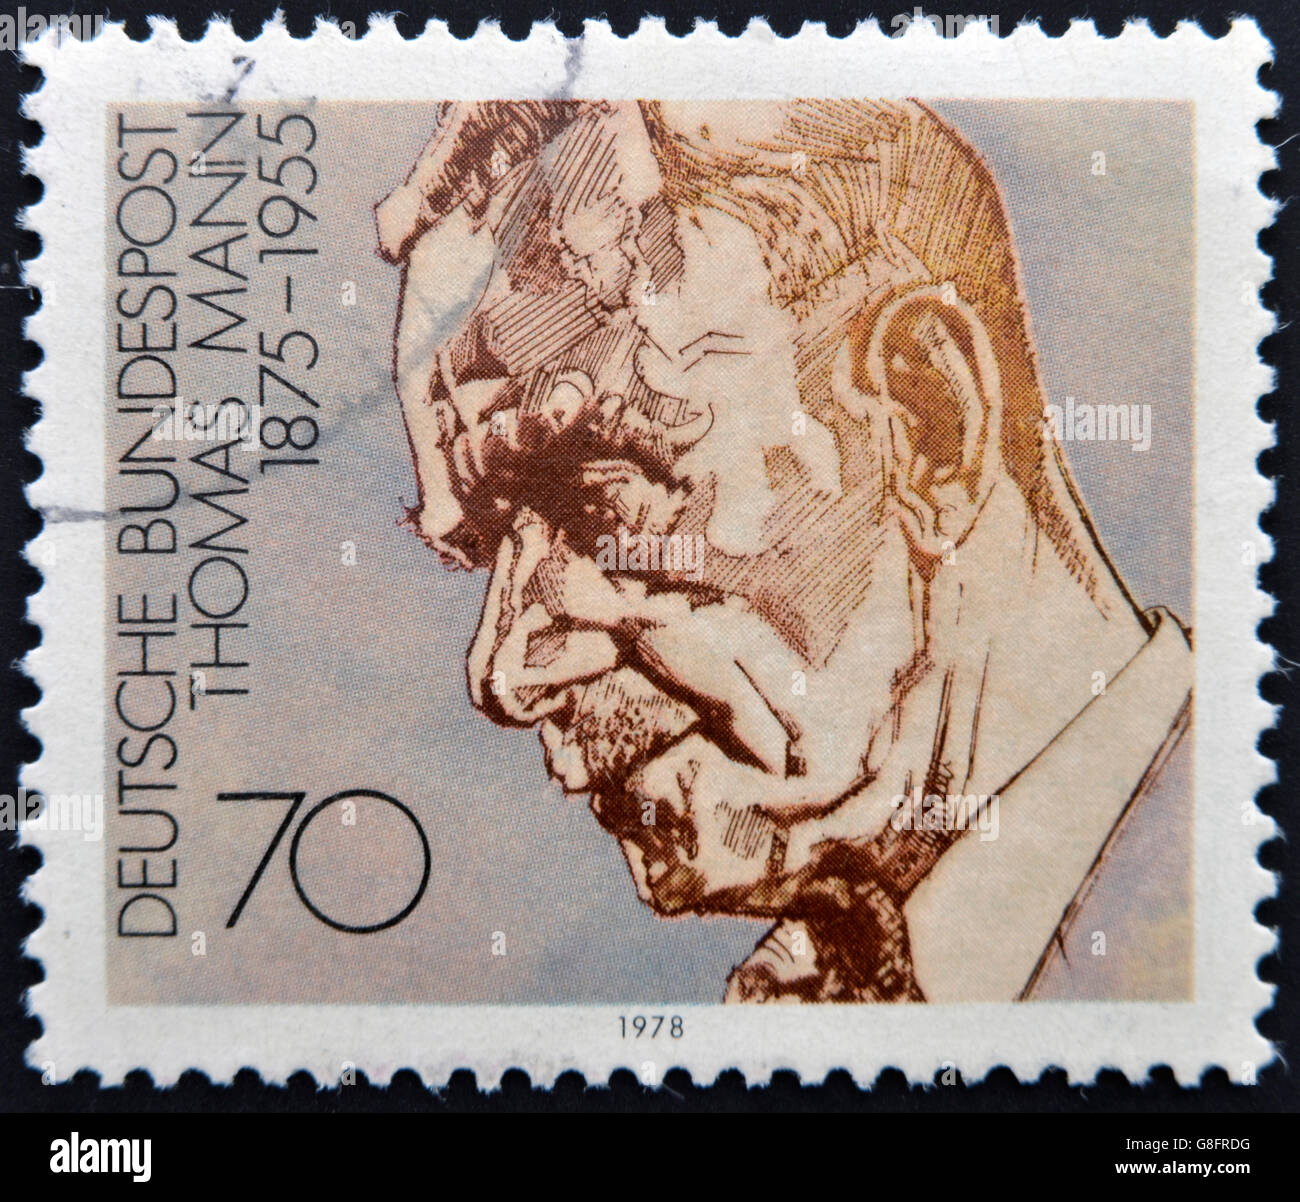 GERMANY - CIRCA 1978: A stamp printed in Germany shows Thomas Mann, circa 1978 Stock Photo